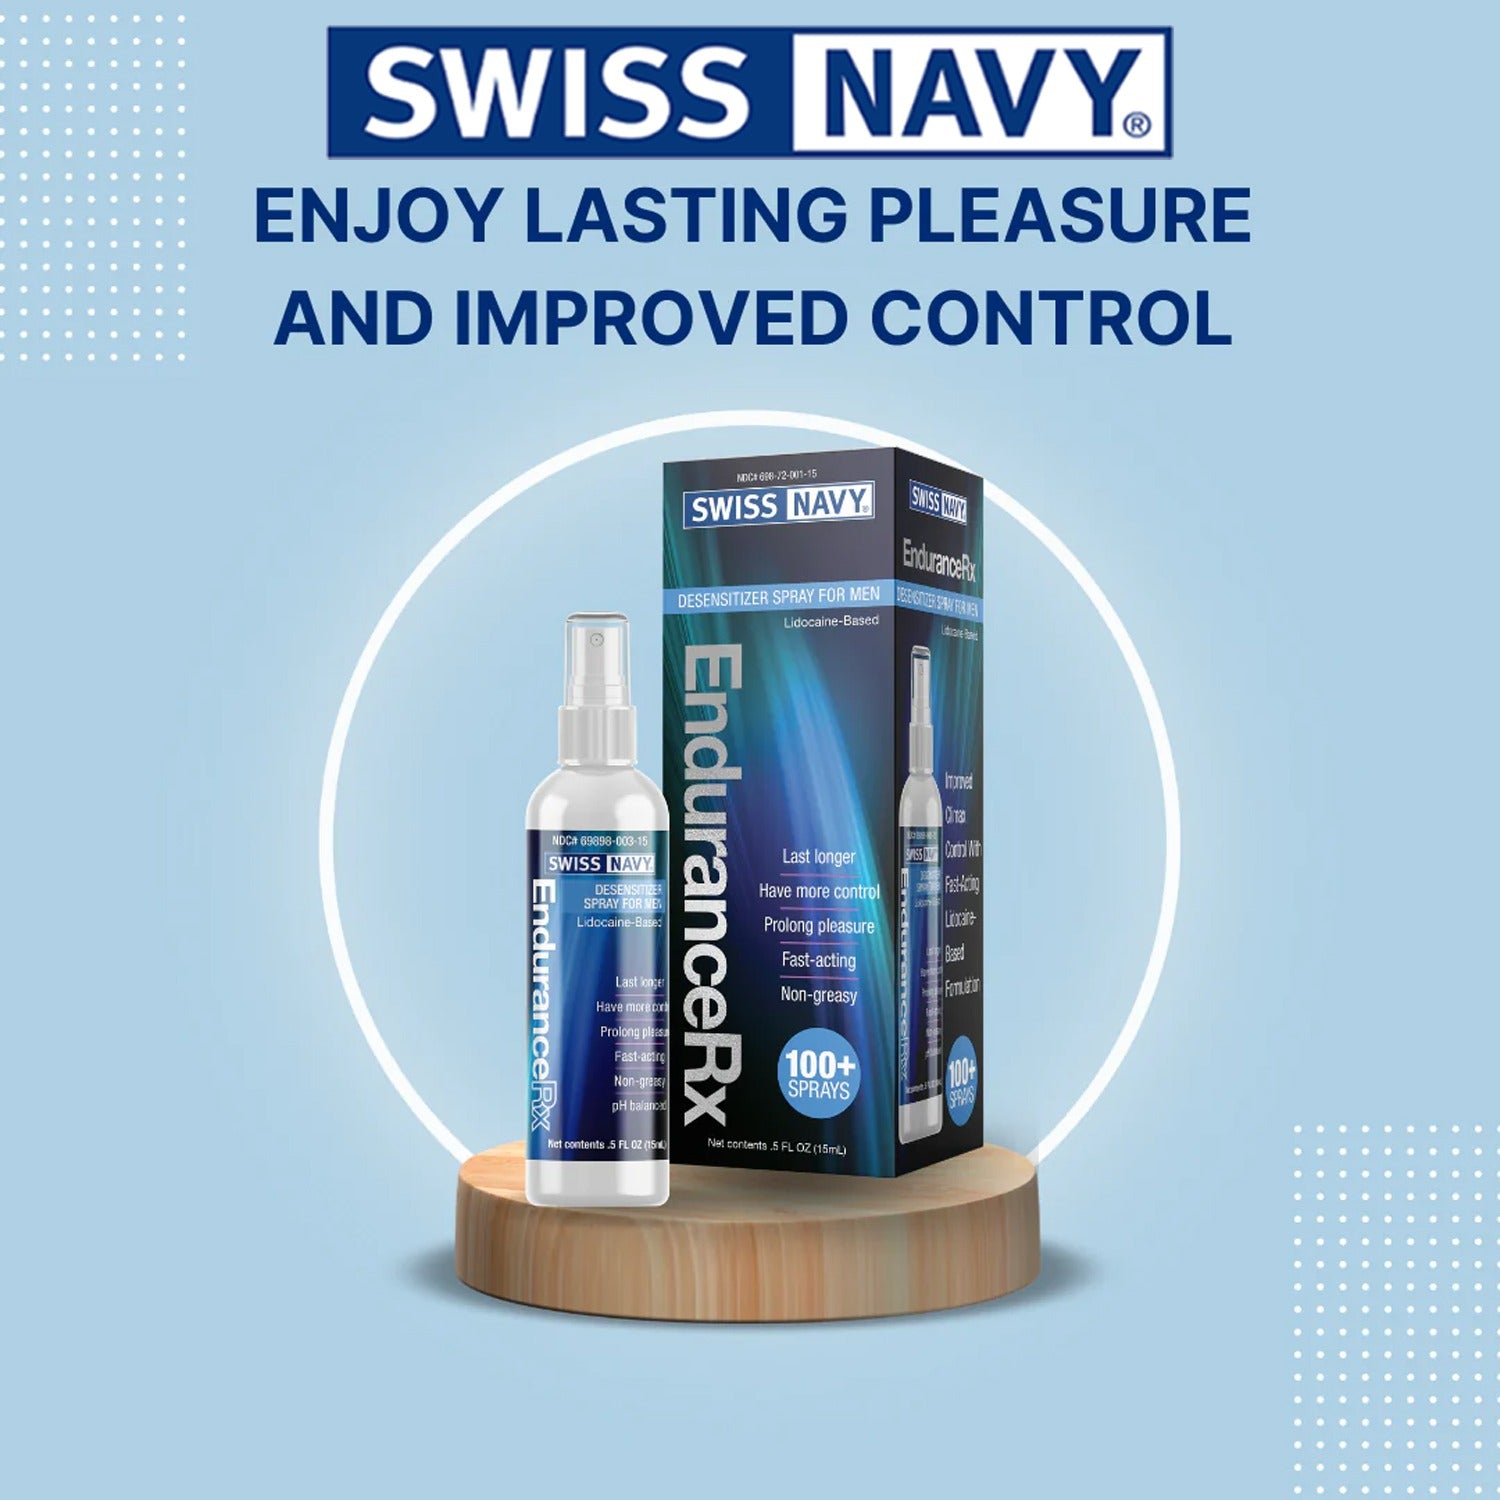 Swiss Navy Endurance RX Desensitizer Spray For Men 15 ml / 0.5 oz bottle standing in front of its packaging box on a wooden stand with a white circle around the product. Swiss navy logo on top, and "Enjoy lasting pleasure and improved control" printed below.